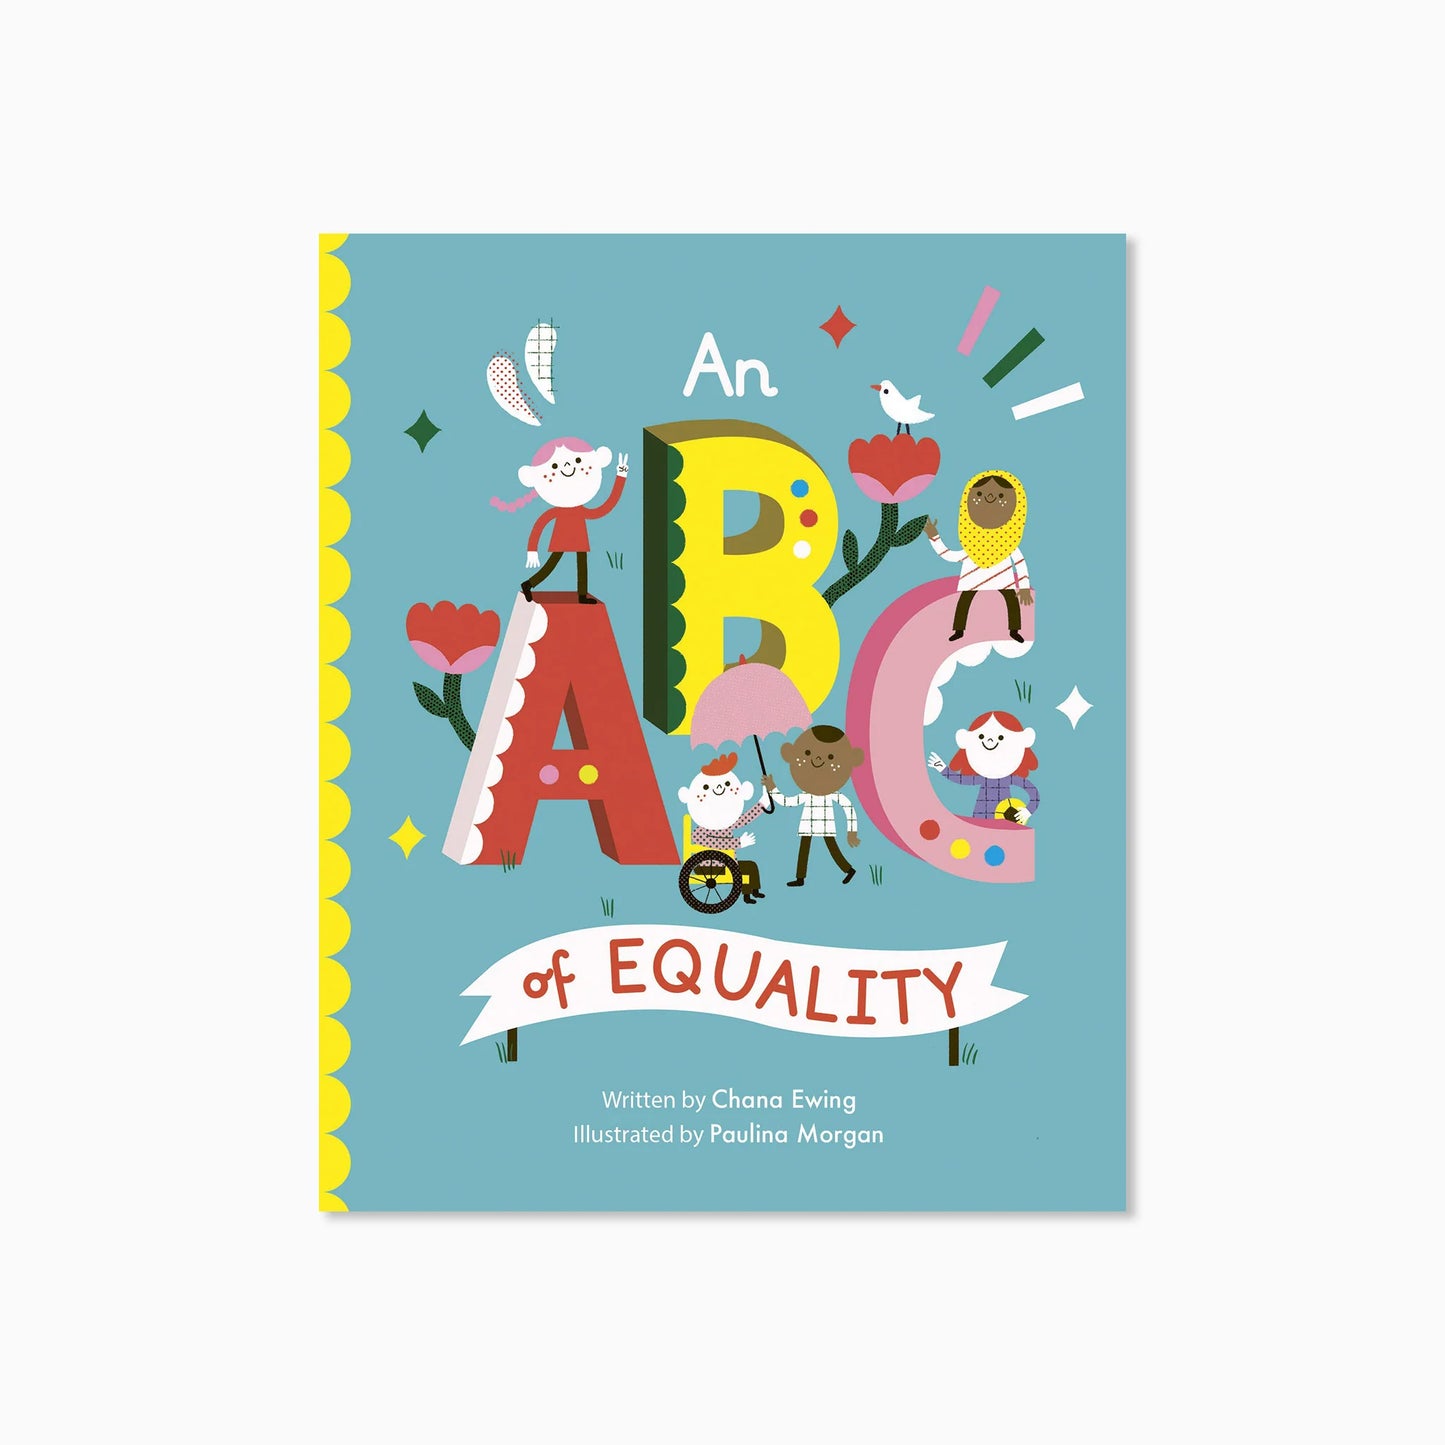 An ABC of Equality by Chana Ginelle Ewing & Paulina Morgan